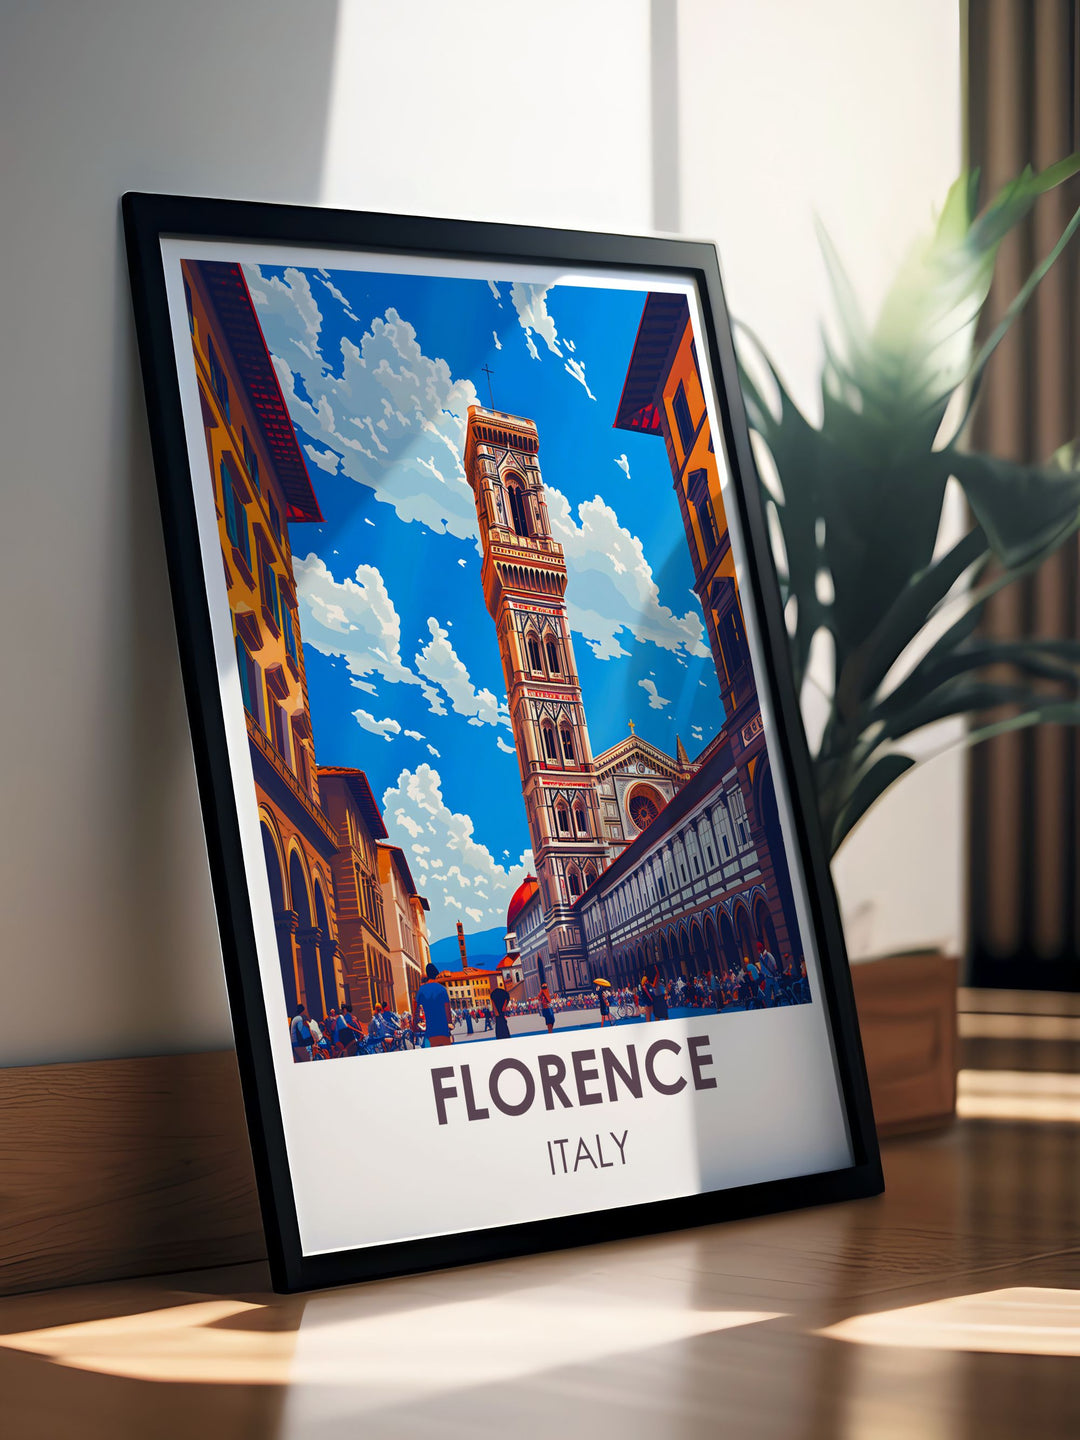 Illustration of Piazza della Signoria in Florence, showcasing the historic square with its stunning sculptures and architecture.